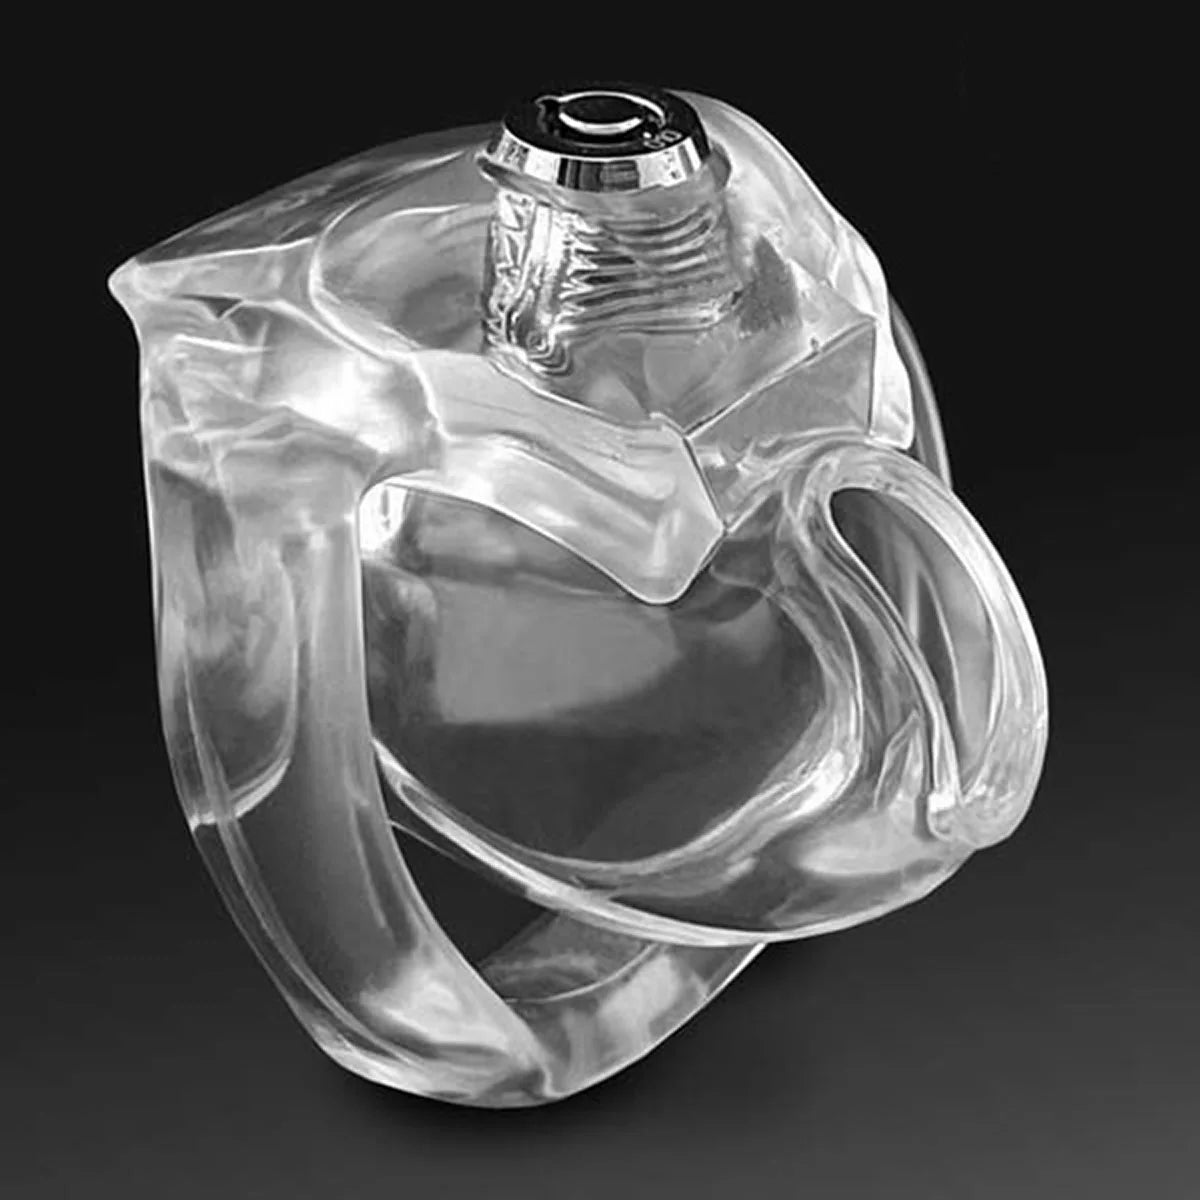 Nub Size Transparent HT-V5 Male Chastity Cage - Lightweight Resin, Latest Button Lock with Exclusive Keys